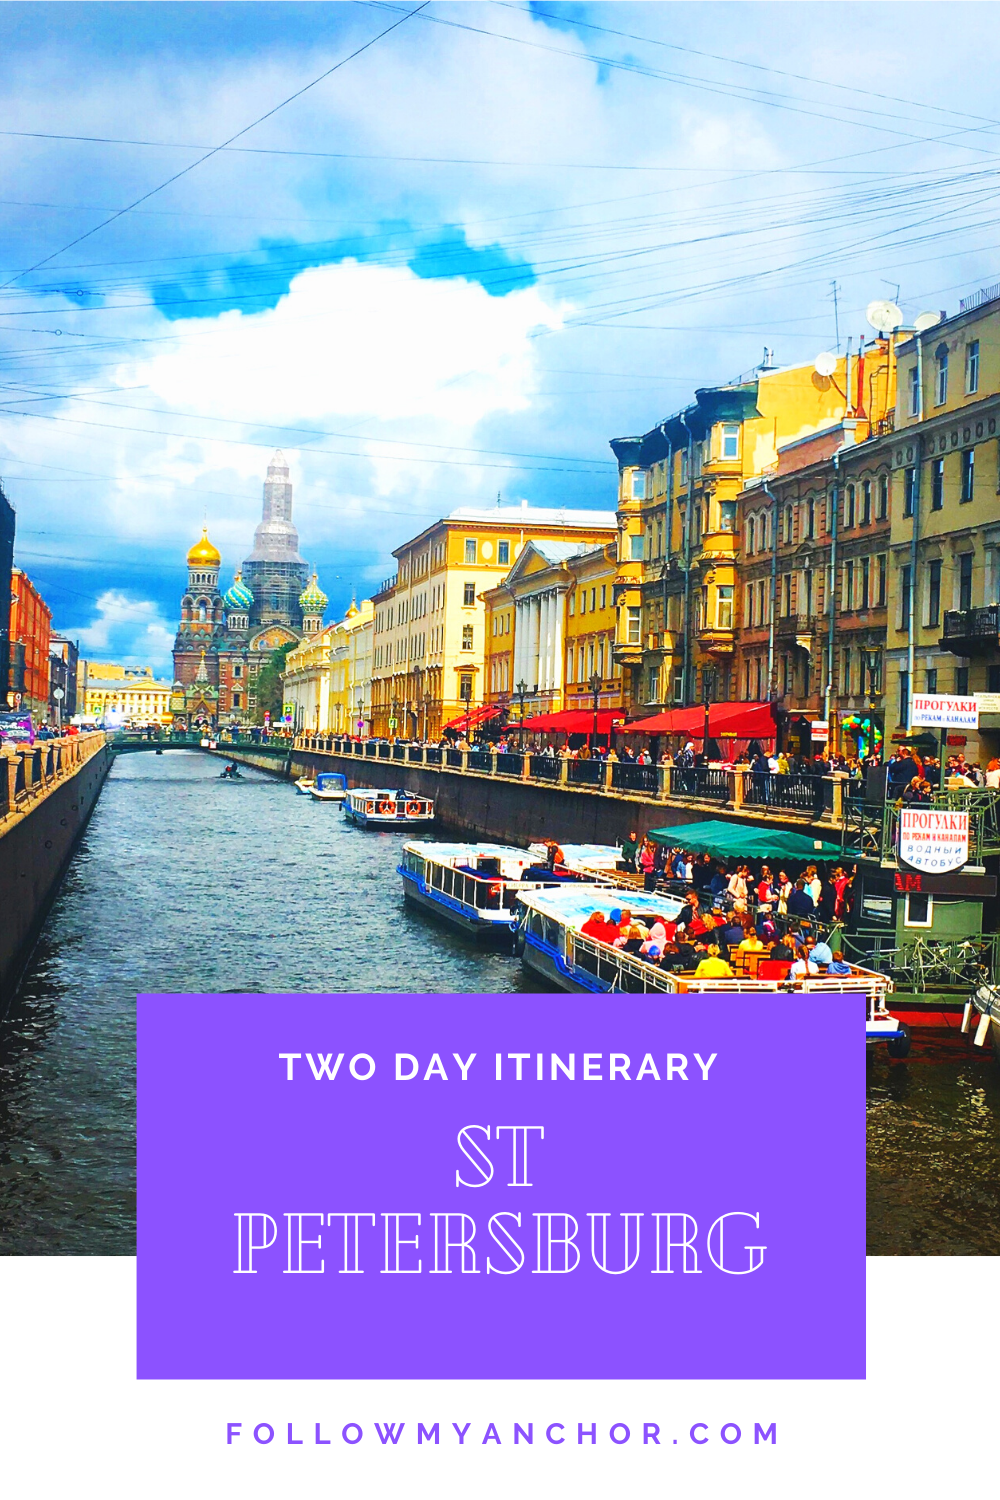 ST PETERSBURG, RUSSIA: THE ULTIMATE LIST OF THE BEST THINGS TO DO IN TWO DAYS